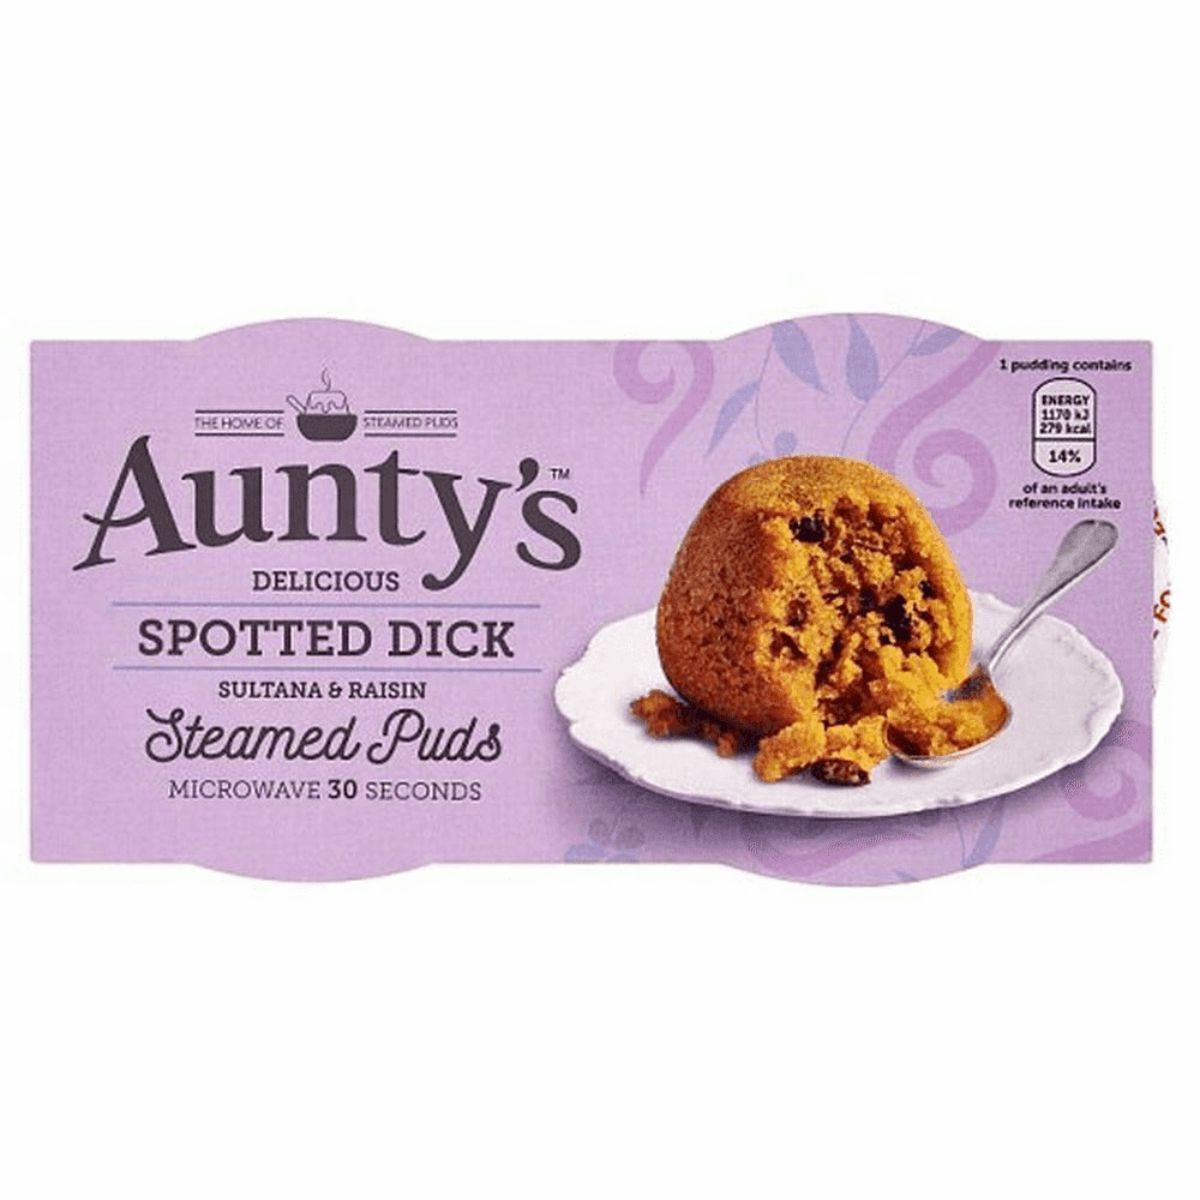 Packaging of Aunty's - Delicious Spotted Dick Steamed Puds - 190g, ready to microwave in 30 seconds.